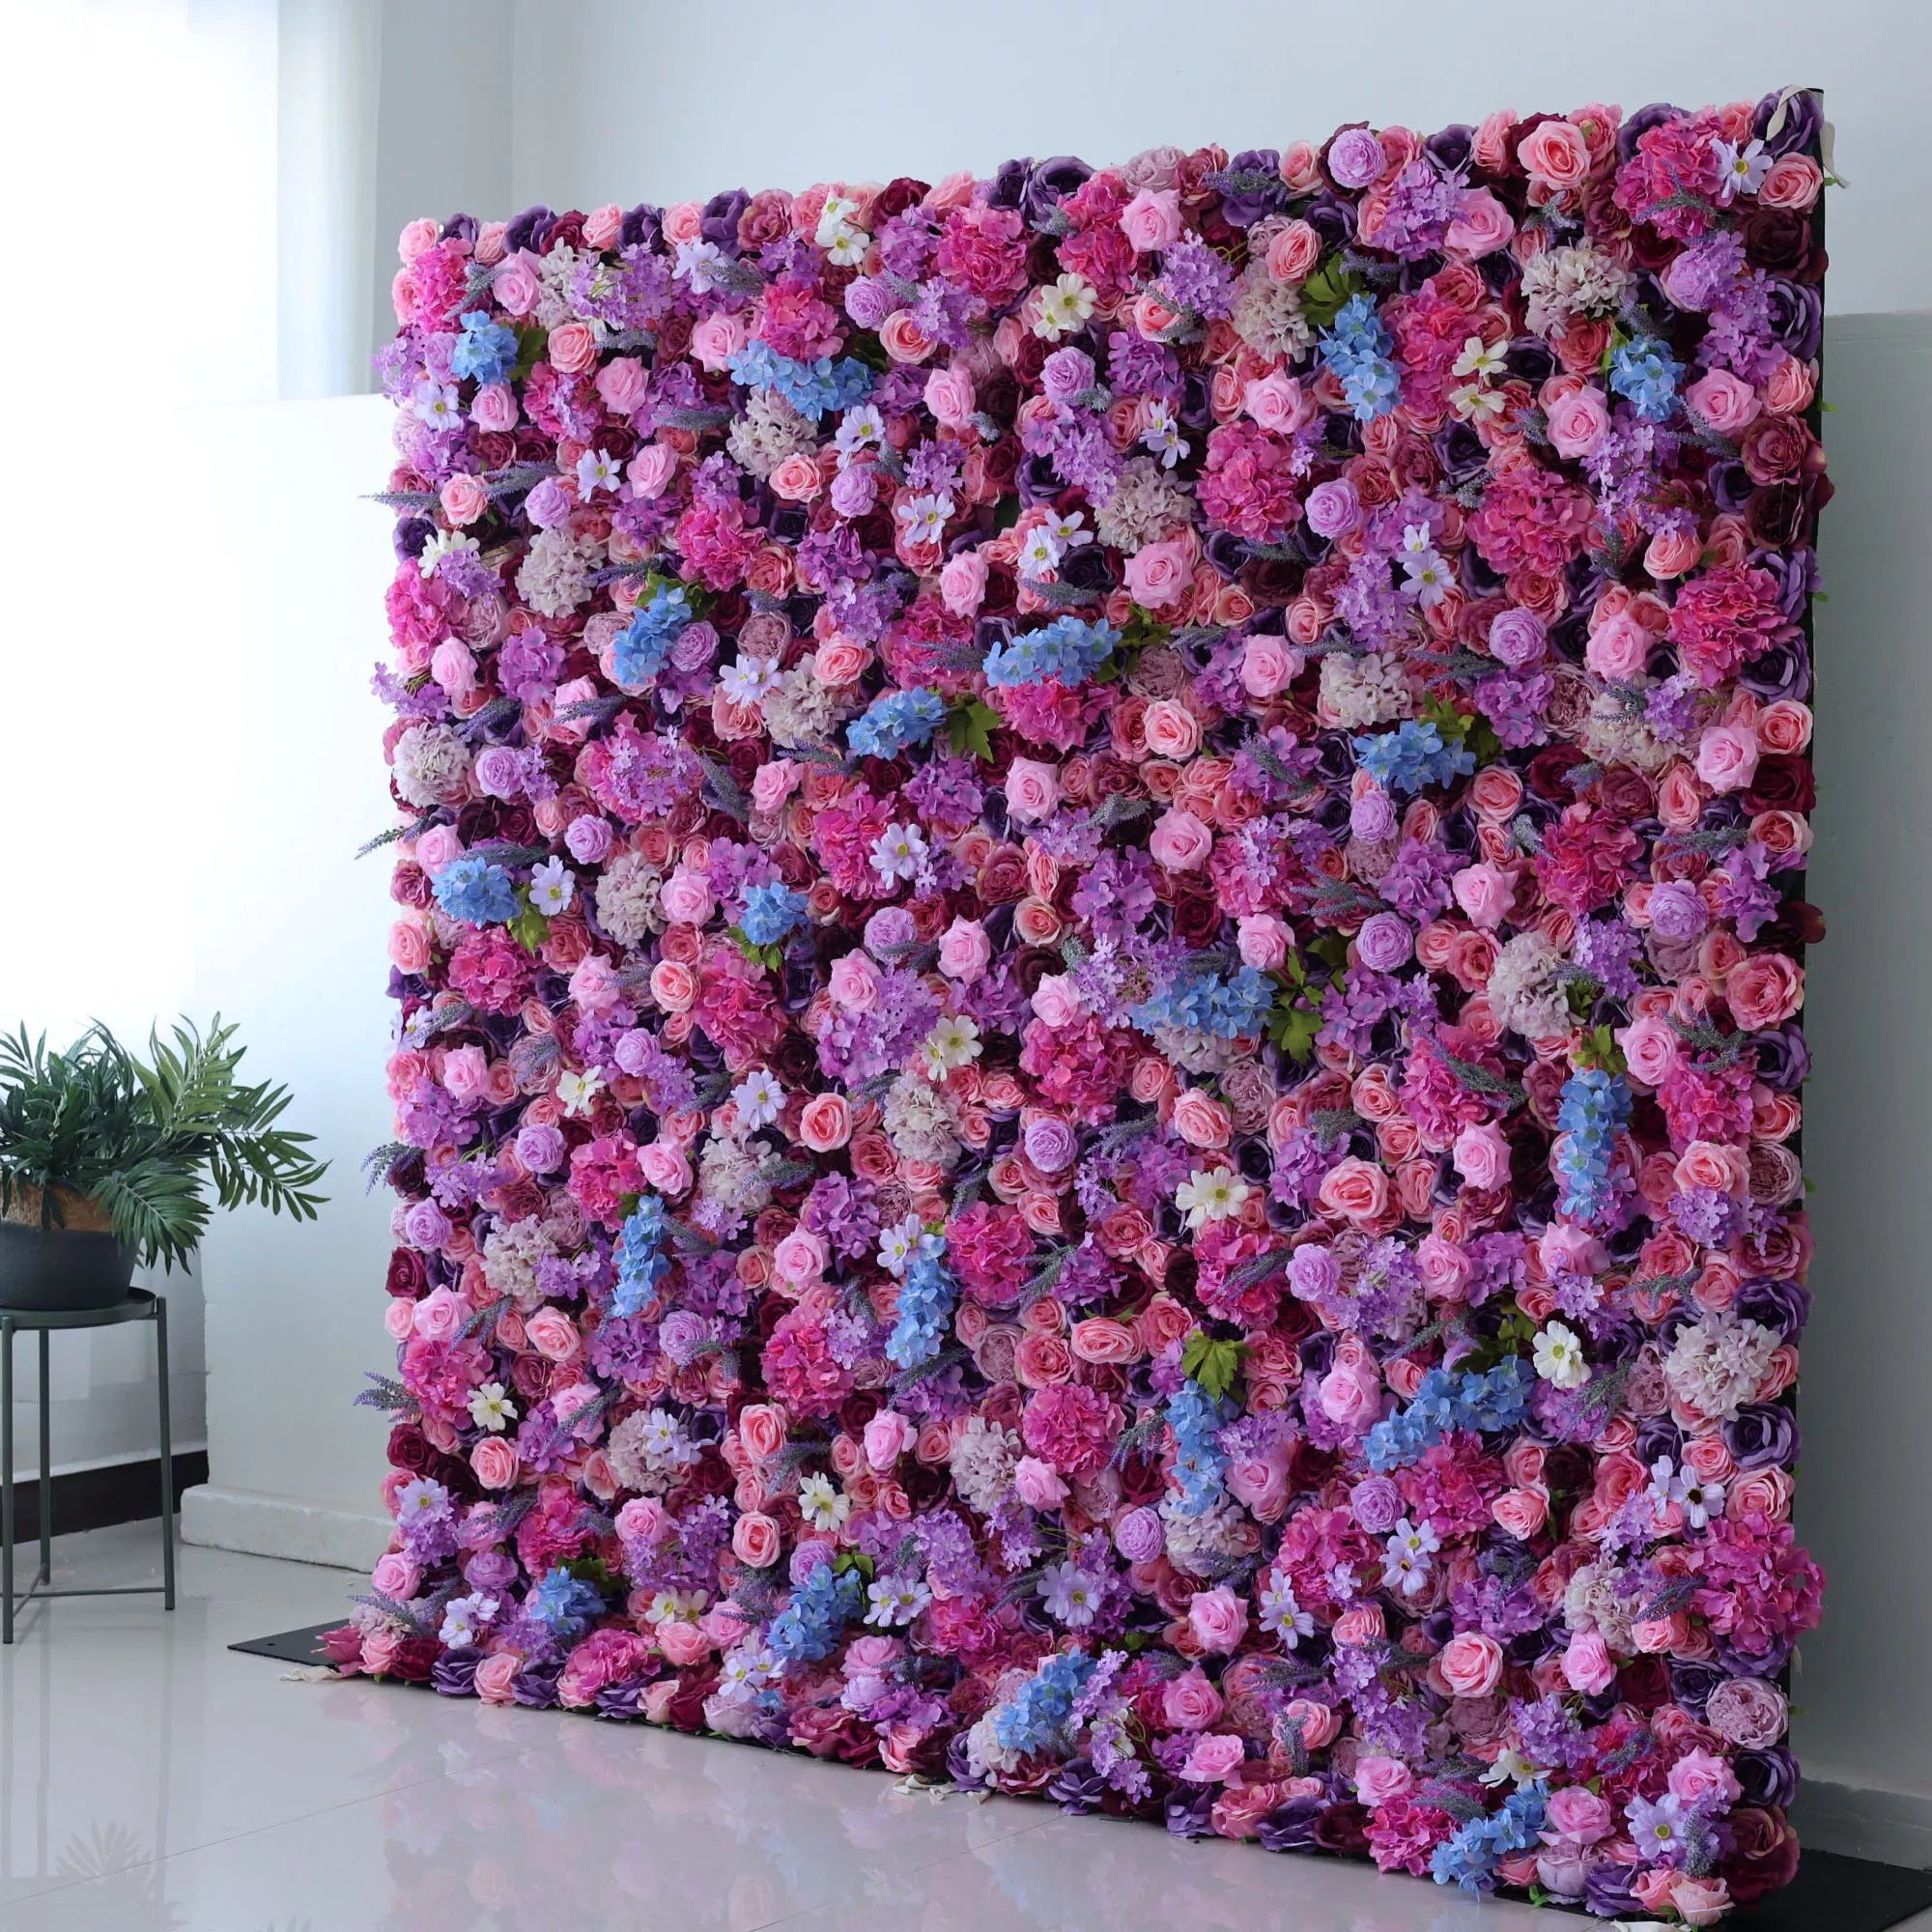 ValarFlowers Backdrop: Experience Mesmerizing Magenta Medley, an enchanting blend of purples, pinks, and whites. A floral fantasy that captivates with its color and charm.